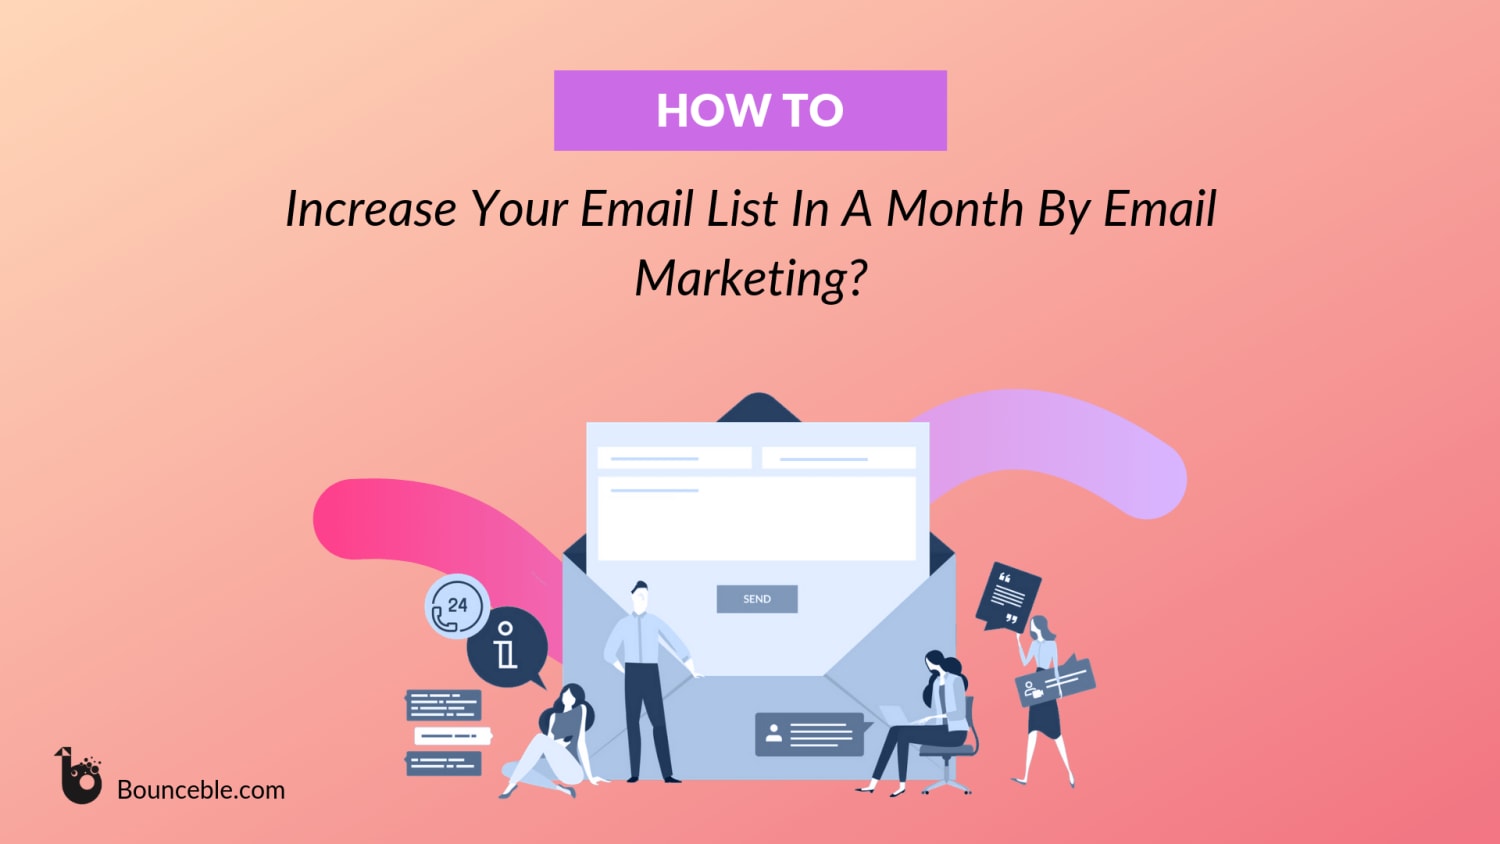 How To Build Email List In A Month By Email Marketing?